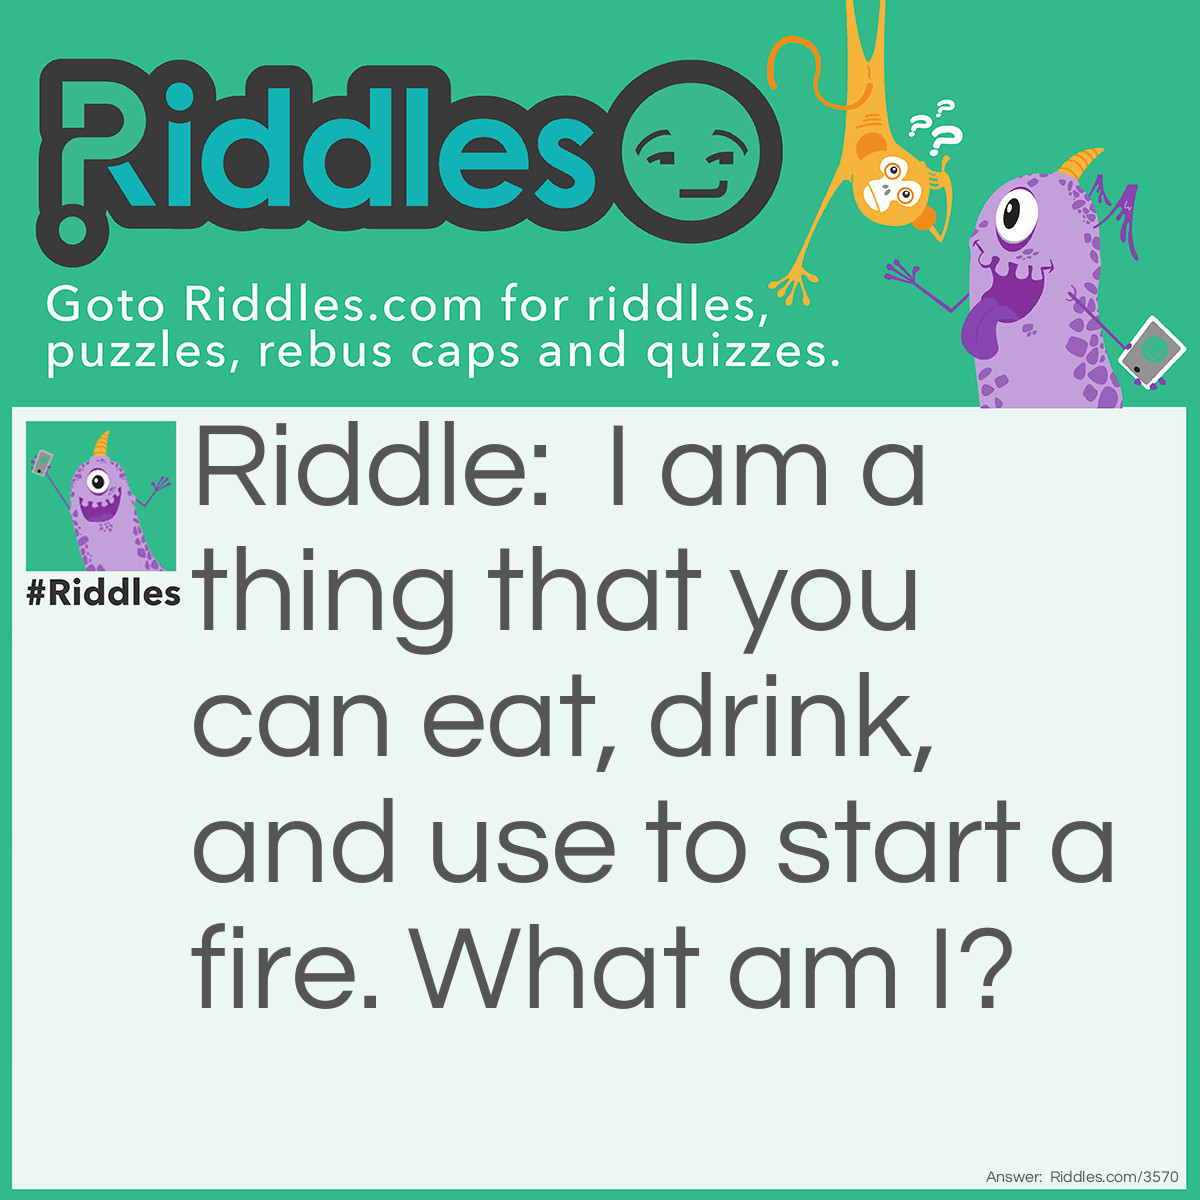 Riddle: I am a thing that you can eat, drink, and use to start a fire. What am I? Answer: Coconut.  You can eat the coconut meat, drink the coconut milk, and use the coconut husk to start a fire.